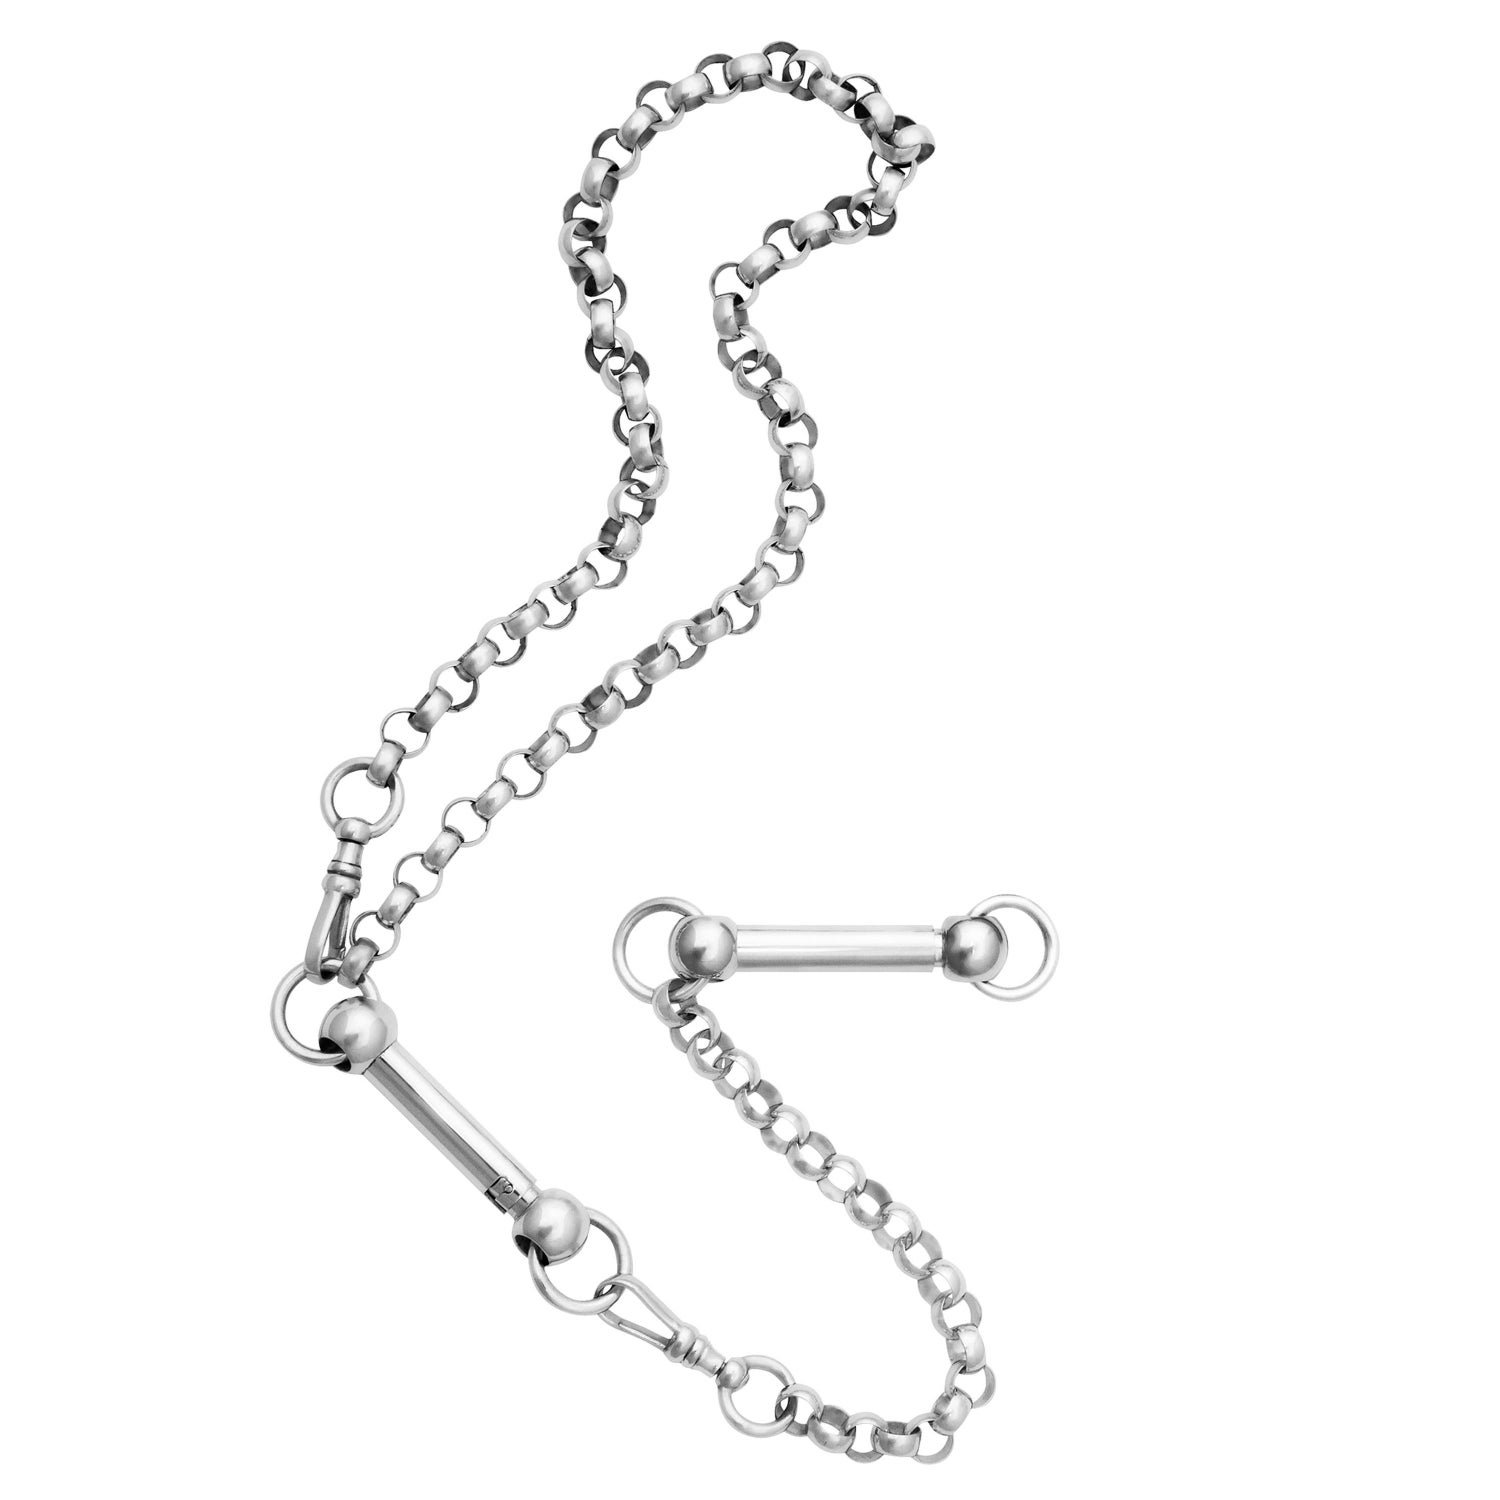 Stainless Ball Chain Connector #3 - Bead Inspirations